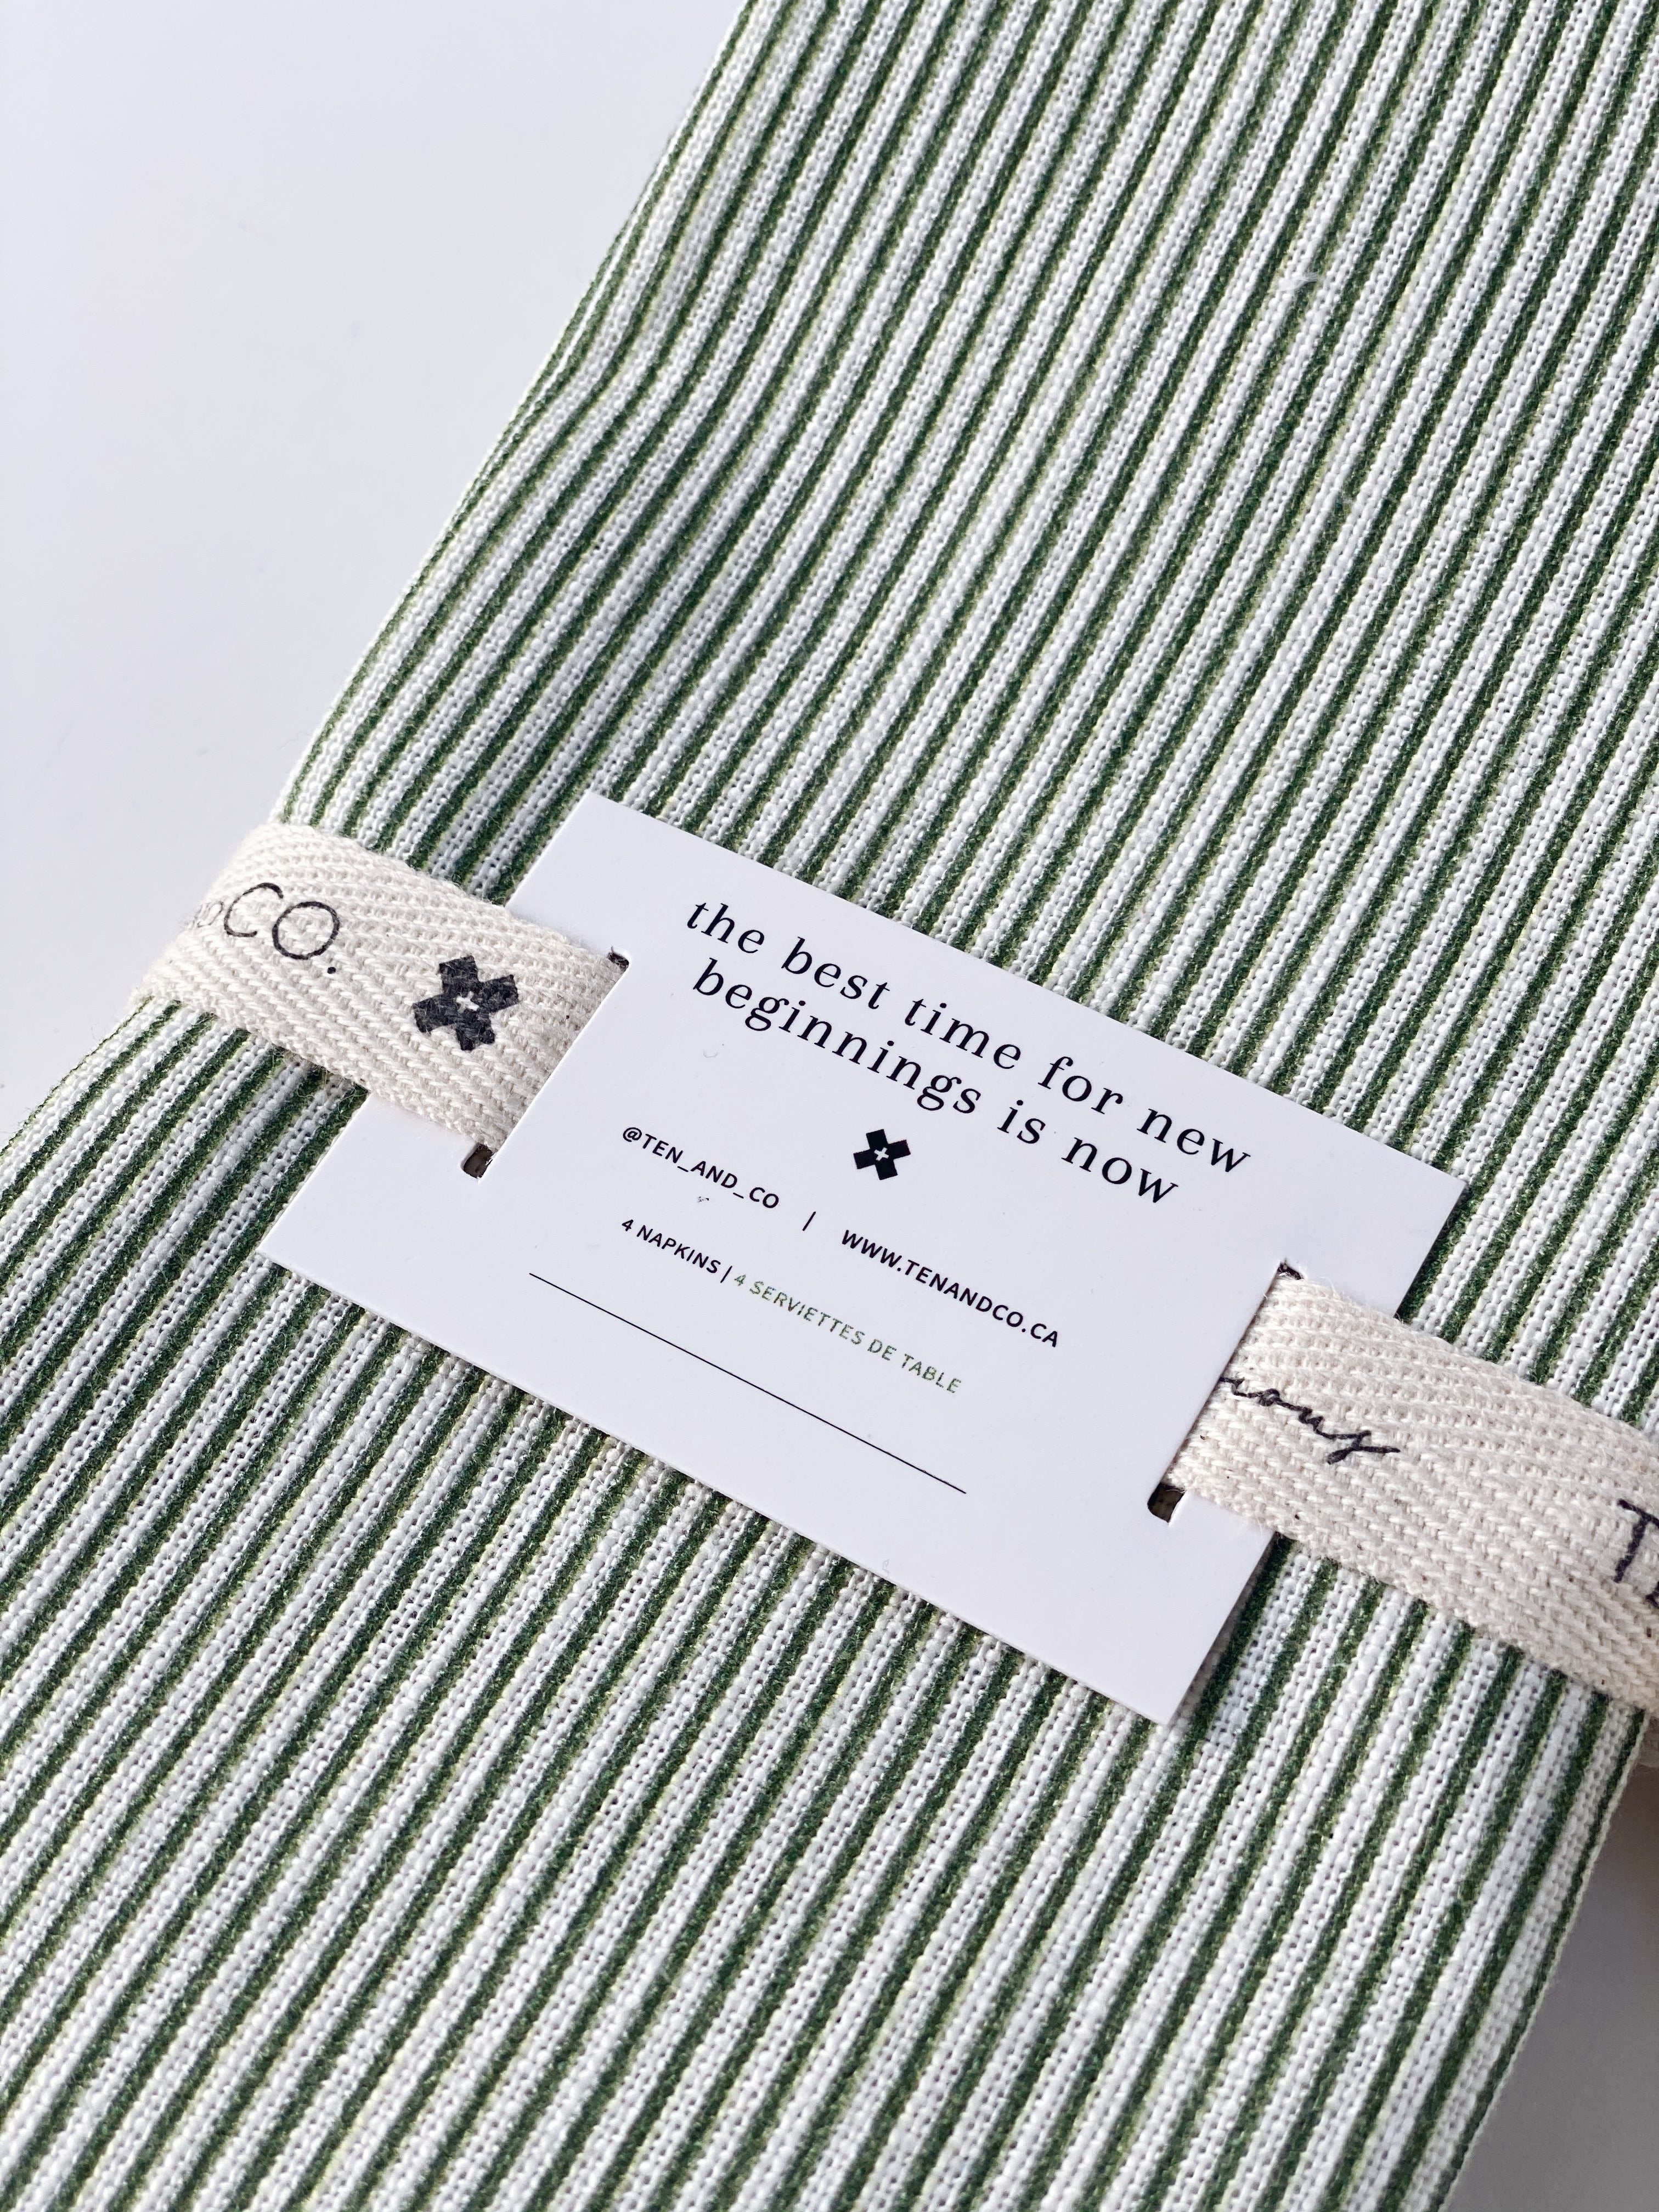 Focus image of Stripes Sage napkins on an angle. Tied together with Ten and Co twill tape and a recyclable paper tag laying on top. The tag reads “The best time for new beginnings is now” in black font with descriptive information underneath.